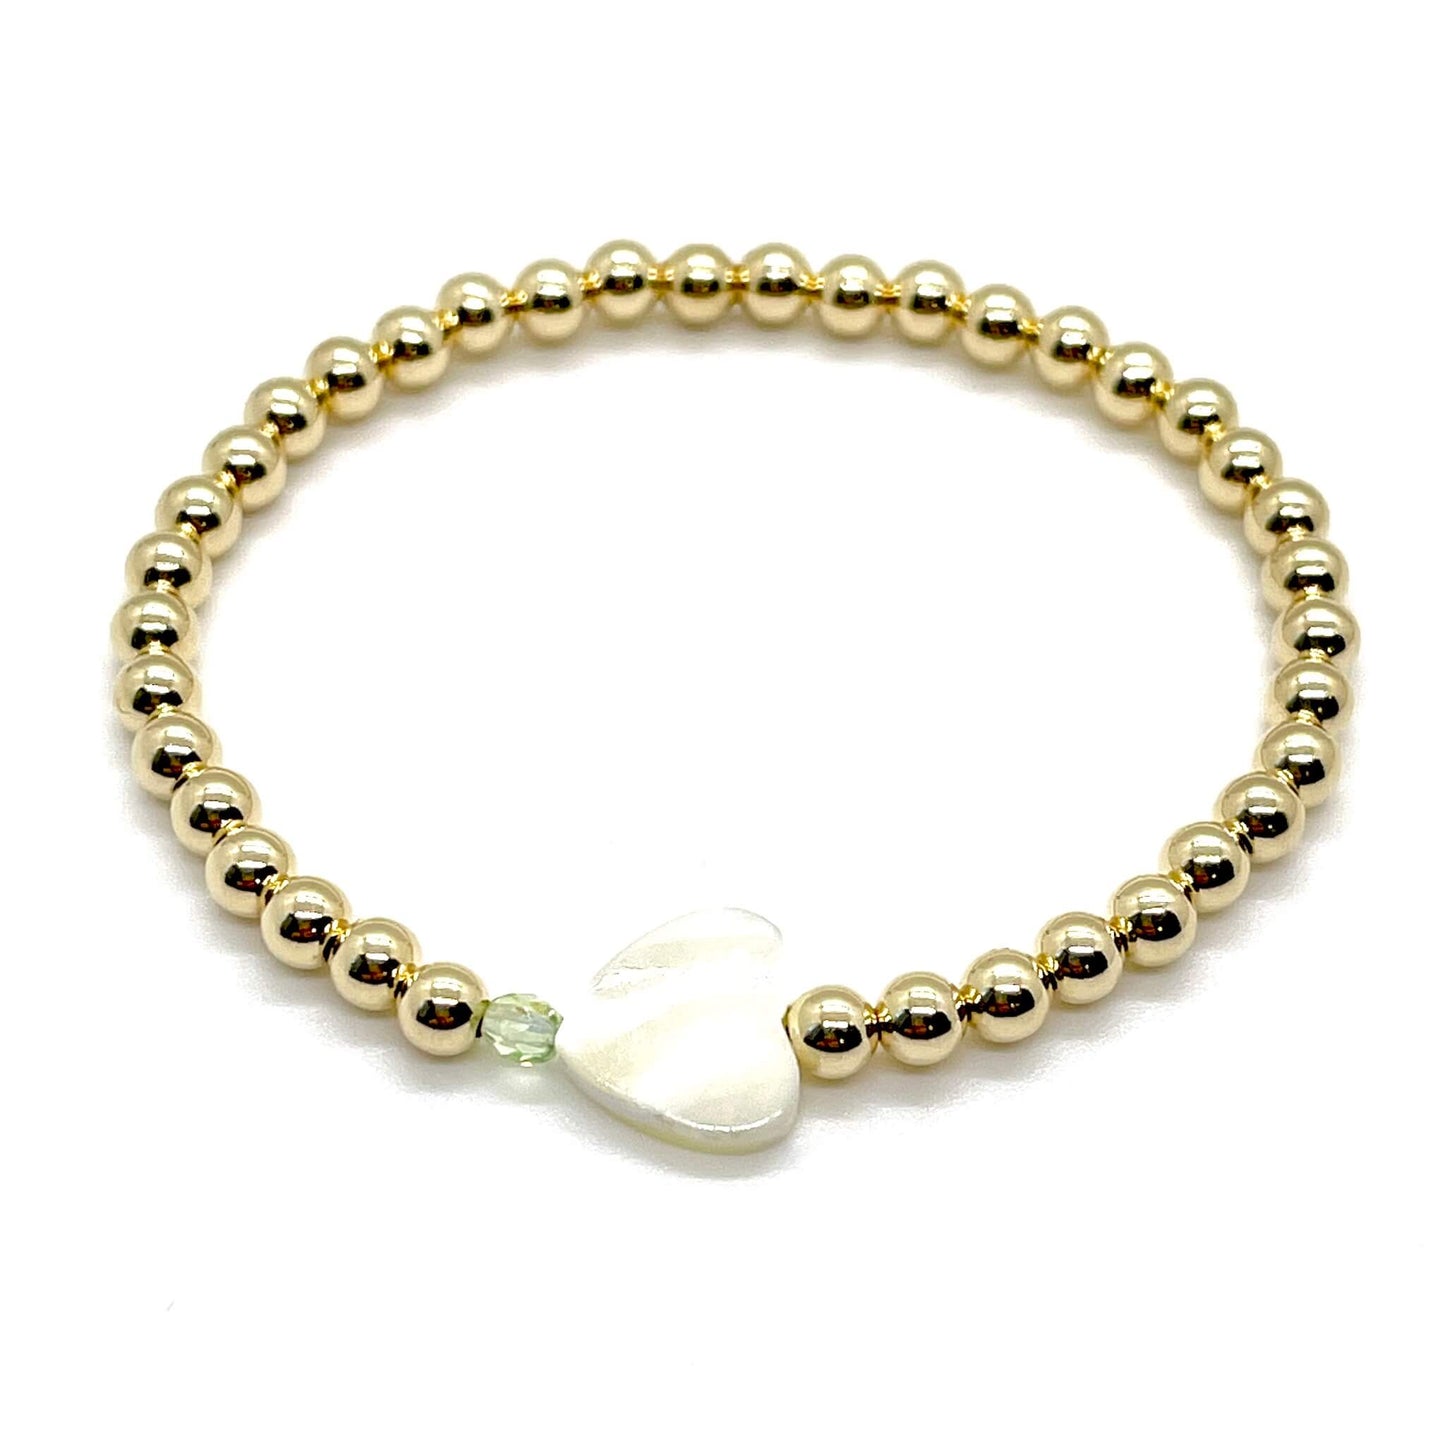 Gold heart bracelet with a mother-of-pearl heart, a small faceted green crystal, and 4mm 14K gold filled beads.